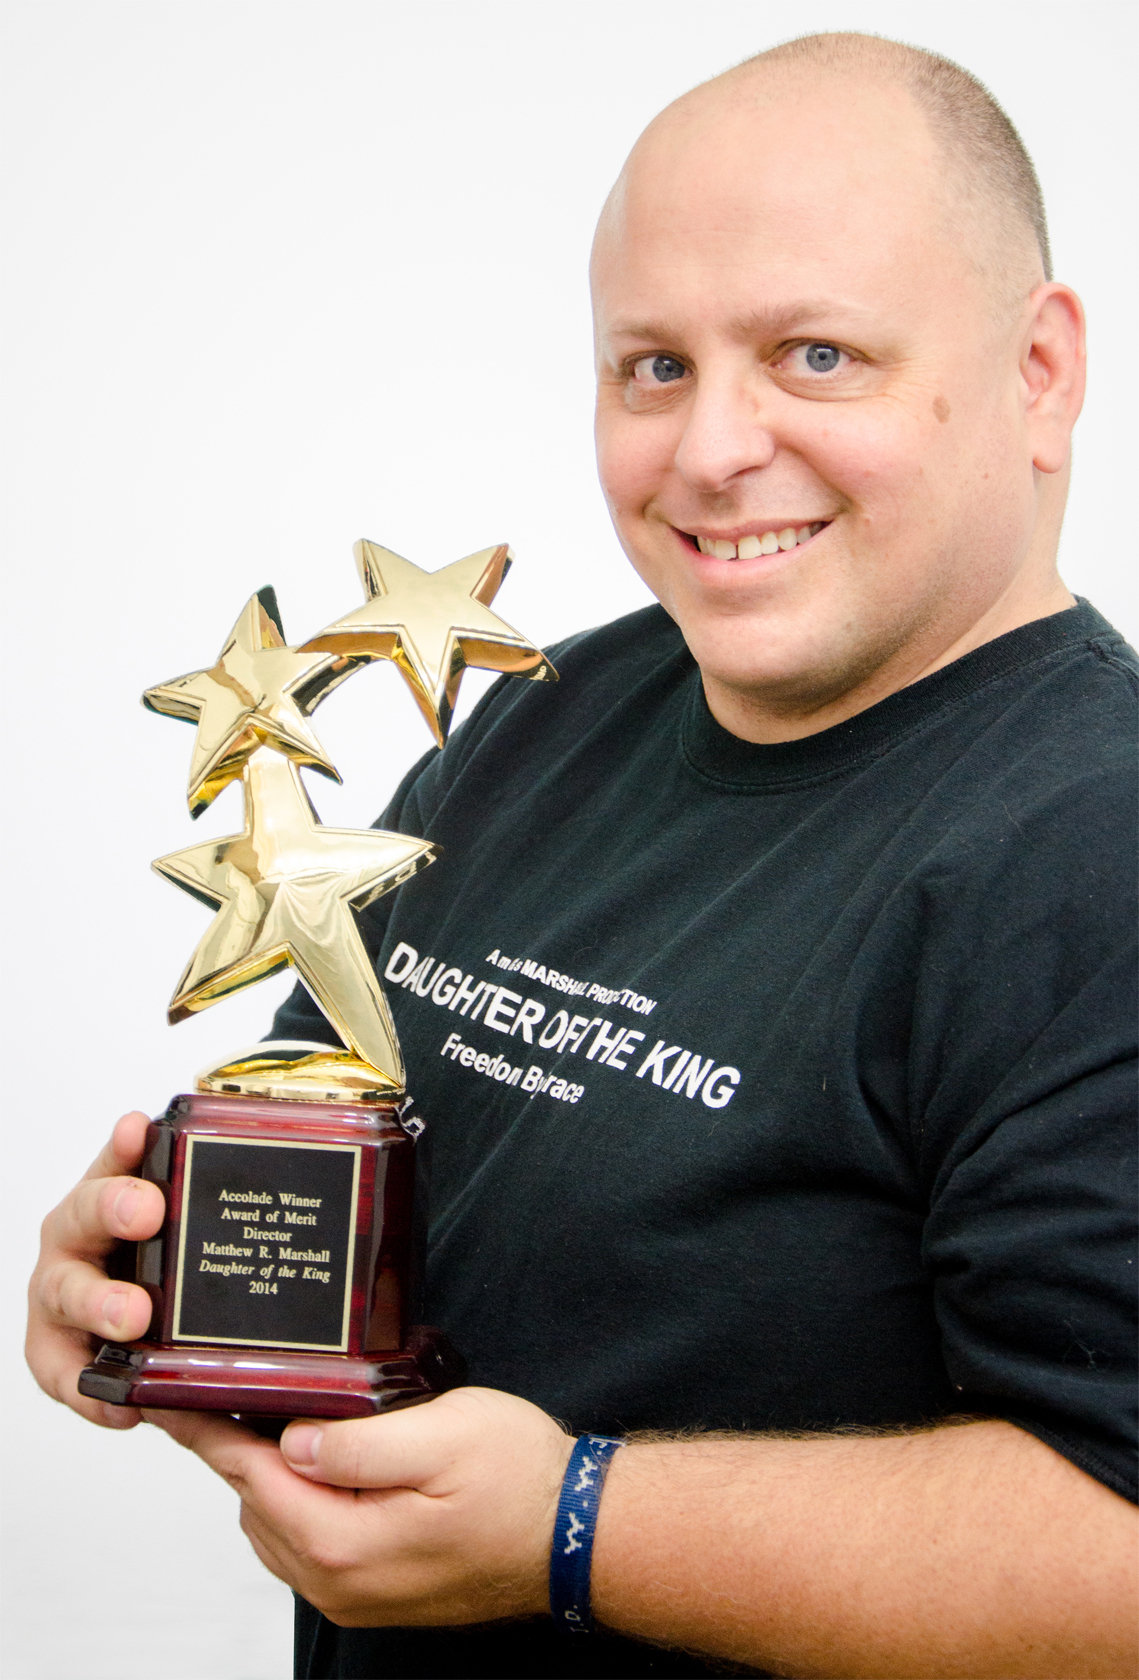 Matthew Marshall with his 2014 Accolade Global Film Competition Award of Merit: Director for Daughter of the King. The independent dramatic production won two other 2014 Accolade Global Film Competition Awards. The production won an Award of Merit: Christian Film and Debra van Gaalen won Award of Merit: Leading Actress for her role as Ashley Miller.